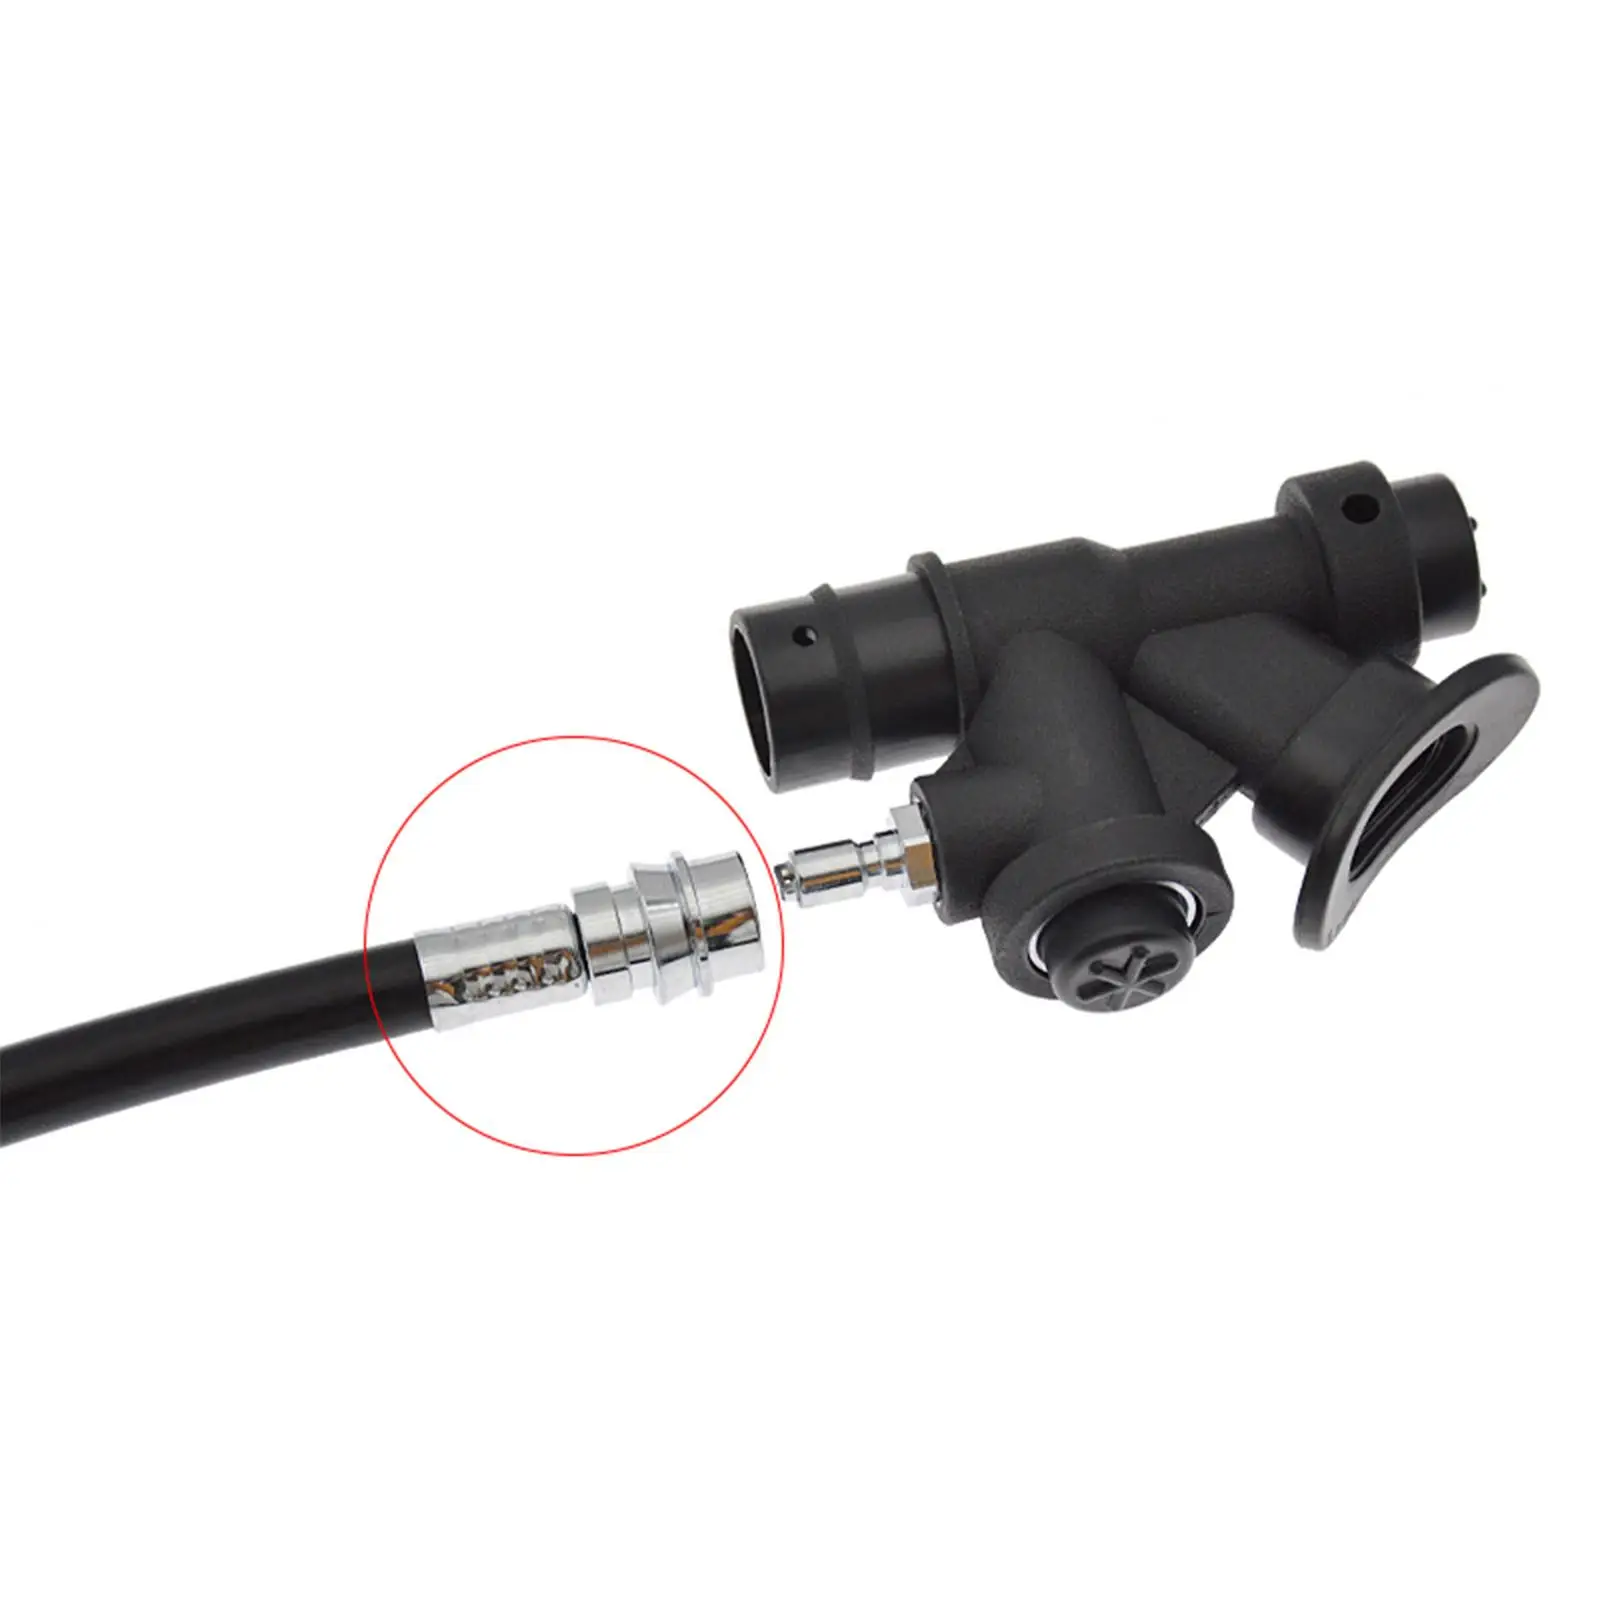 Scuba Diving Regulator Adapter BCD Low Pressure Hose Adaptor Female End Connector Diving Tank Dive Quick Joint Connector Parts